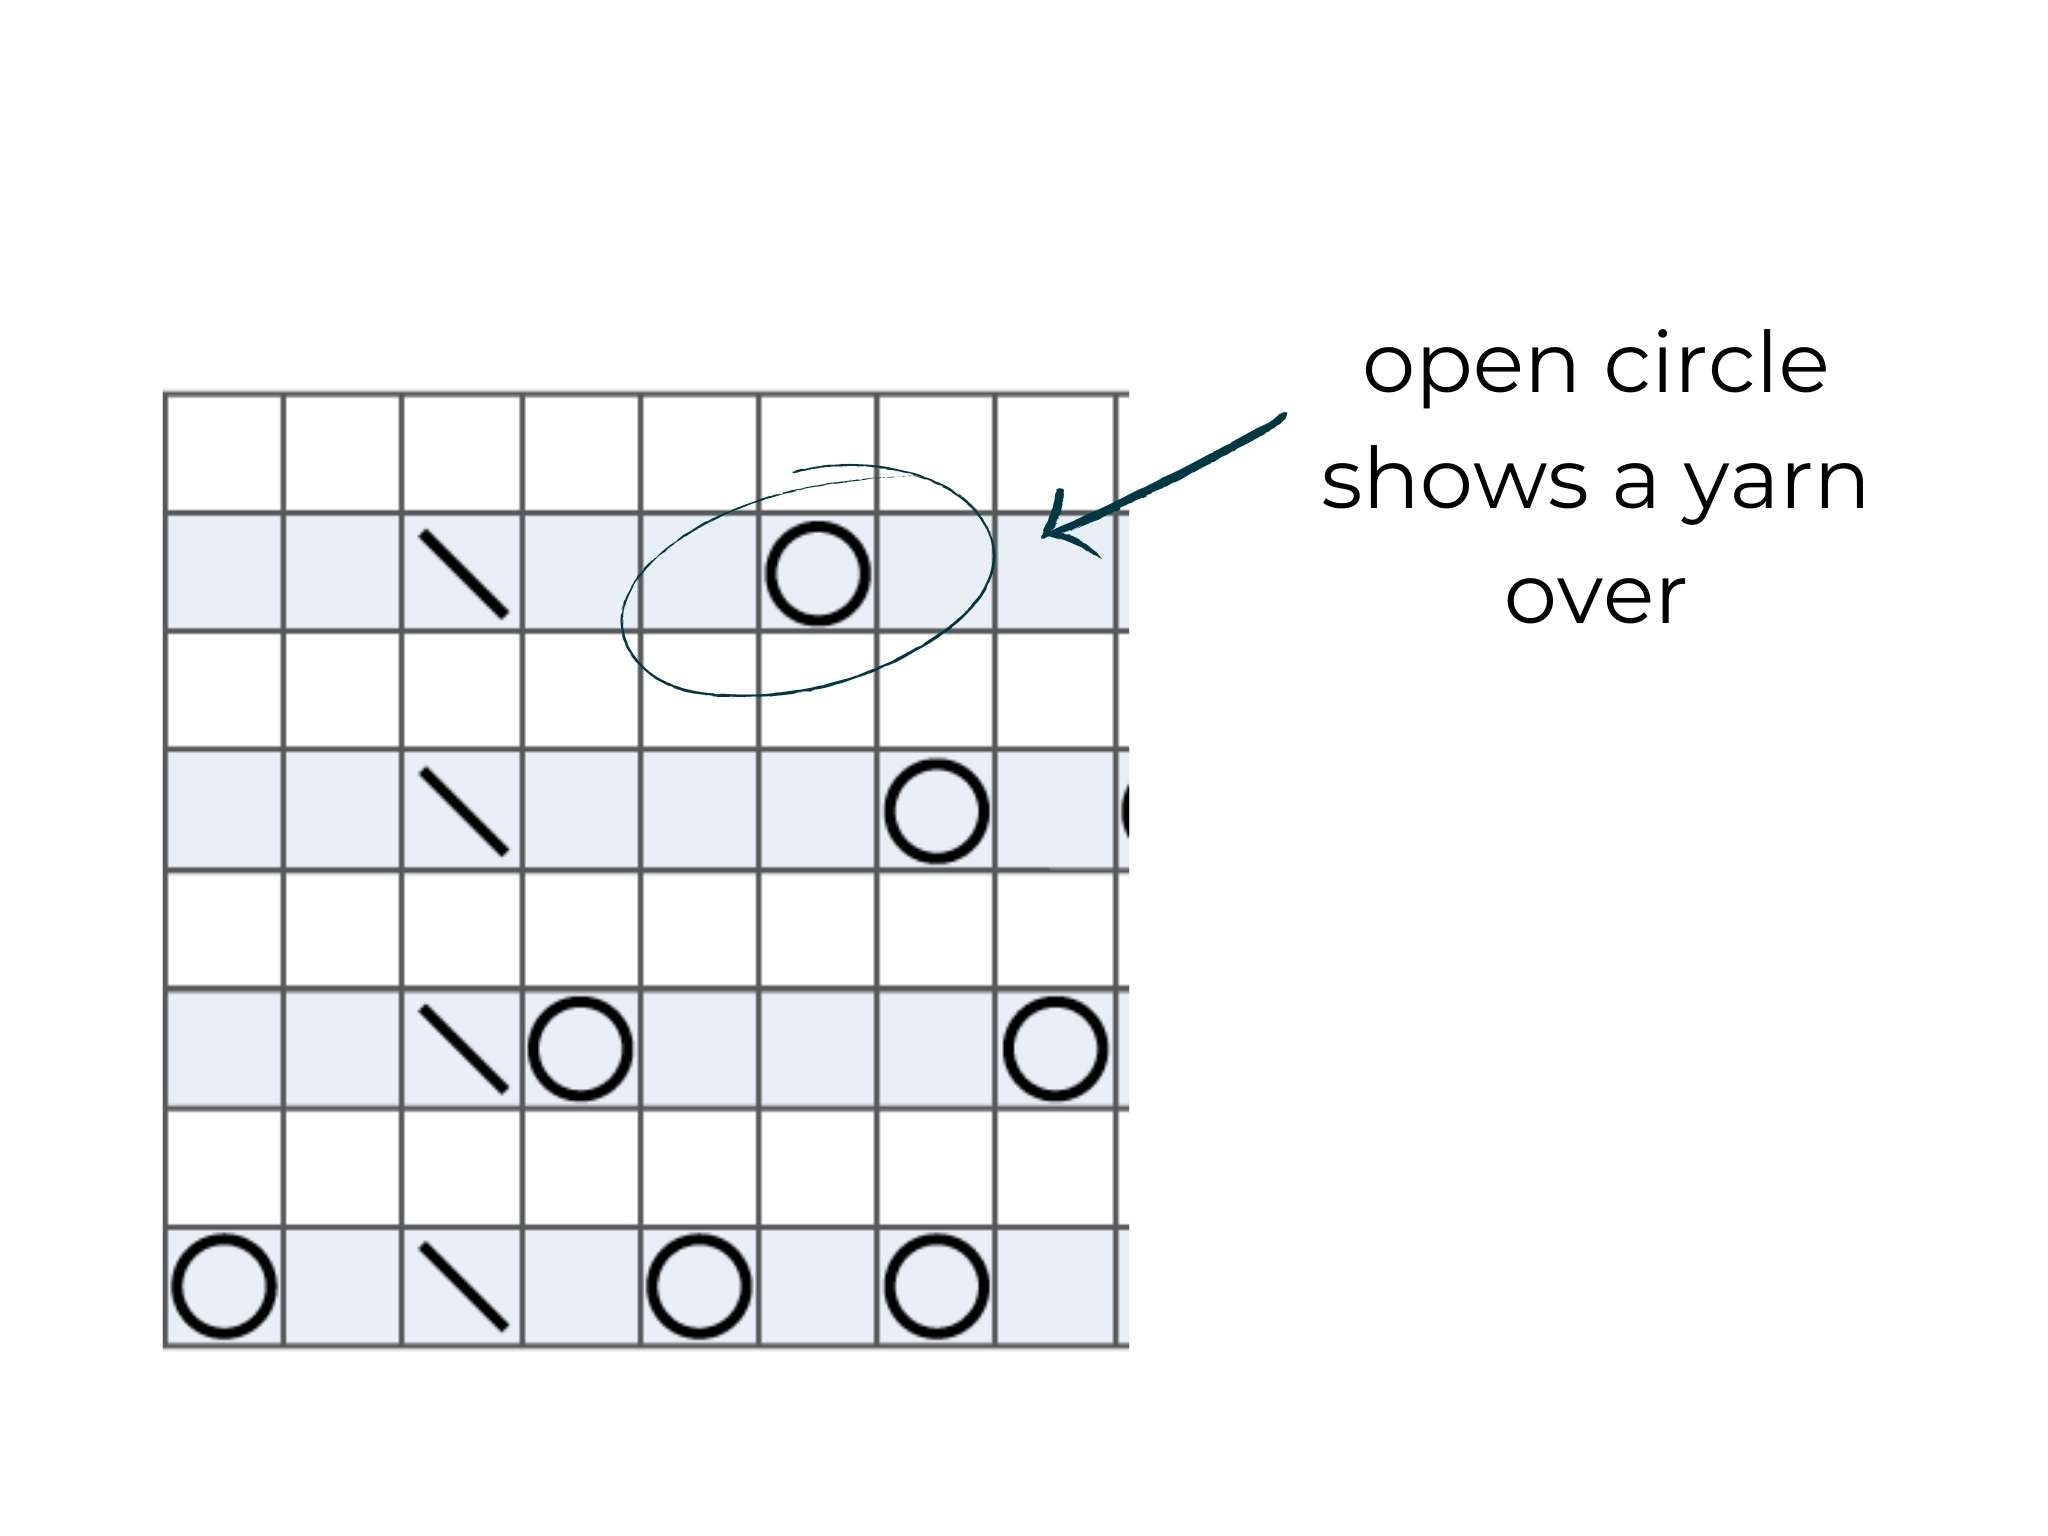 a knitting chart showing an open circle symbol, labelled as a yarn over.